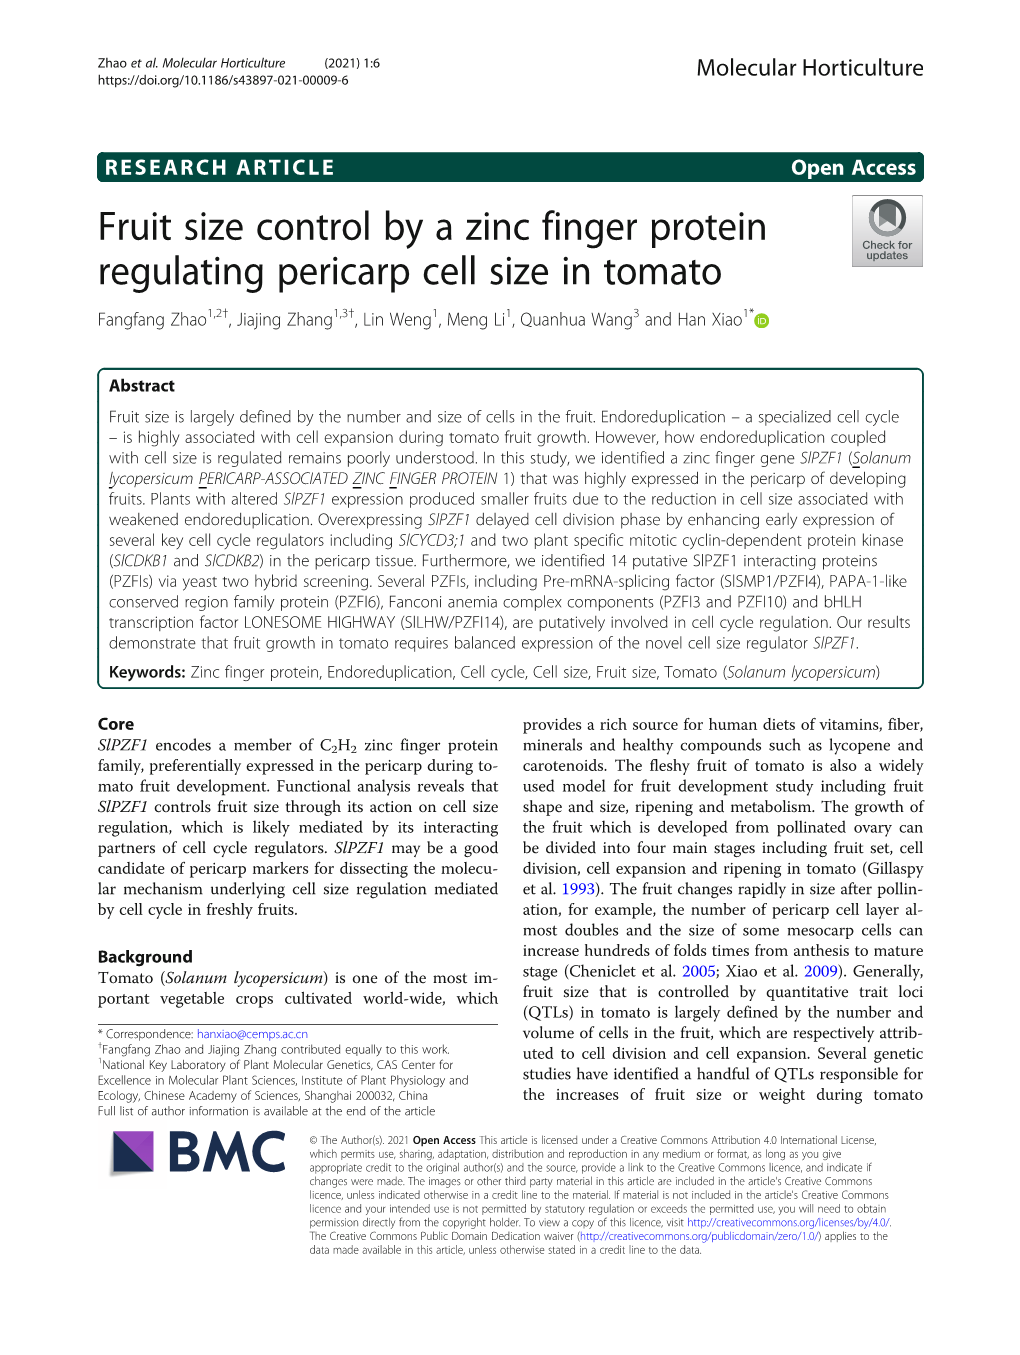 Fruit Size Control by a Zinc Finger Protein Regulating Pericarp Cell Size